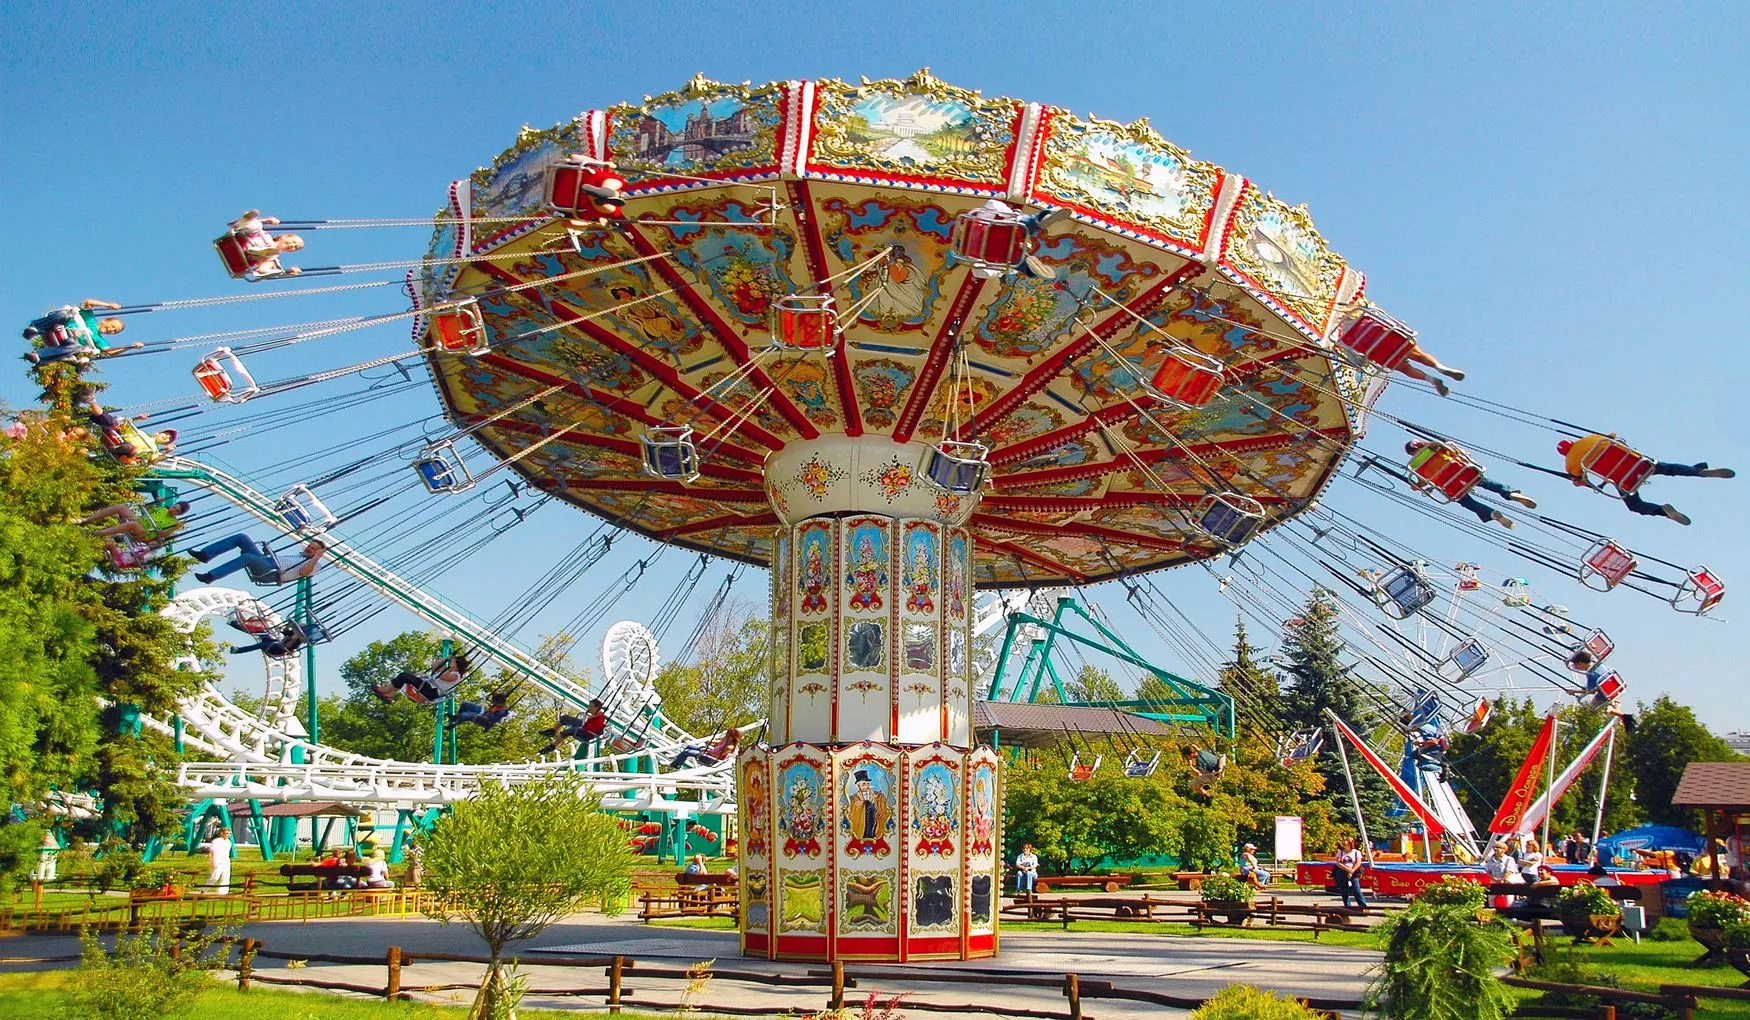 Divo Ostrov in Russia, Europe | Amusement Parks & Rides - Rated 4.5